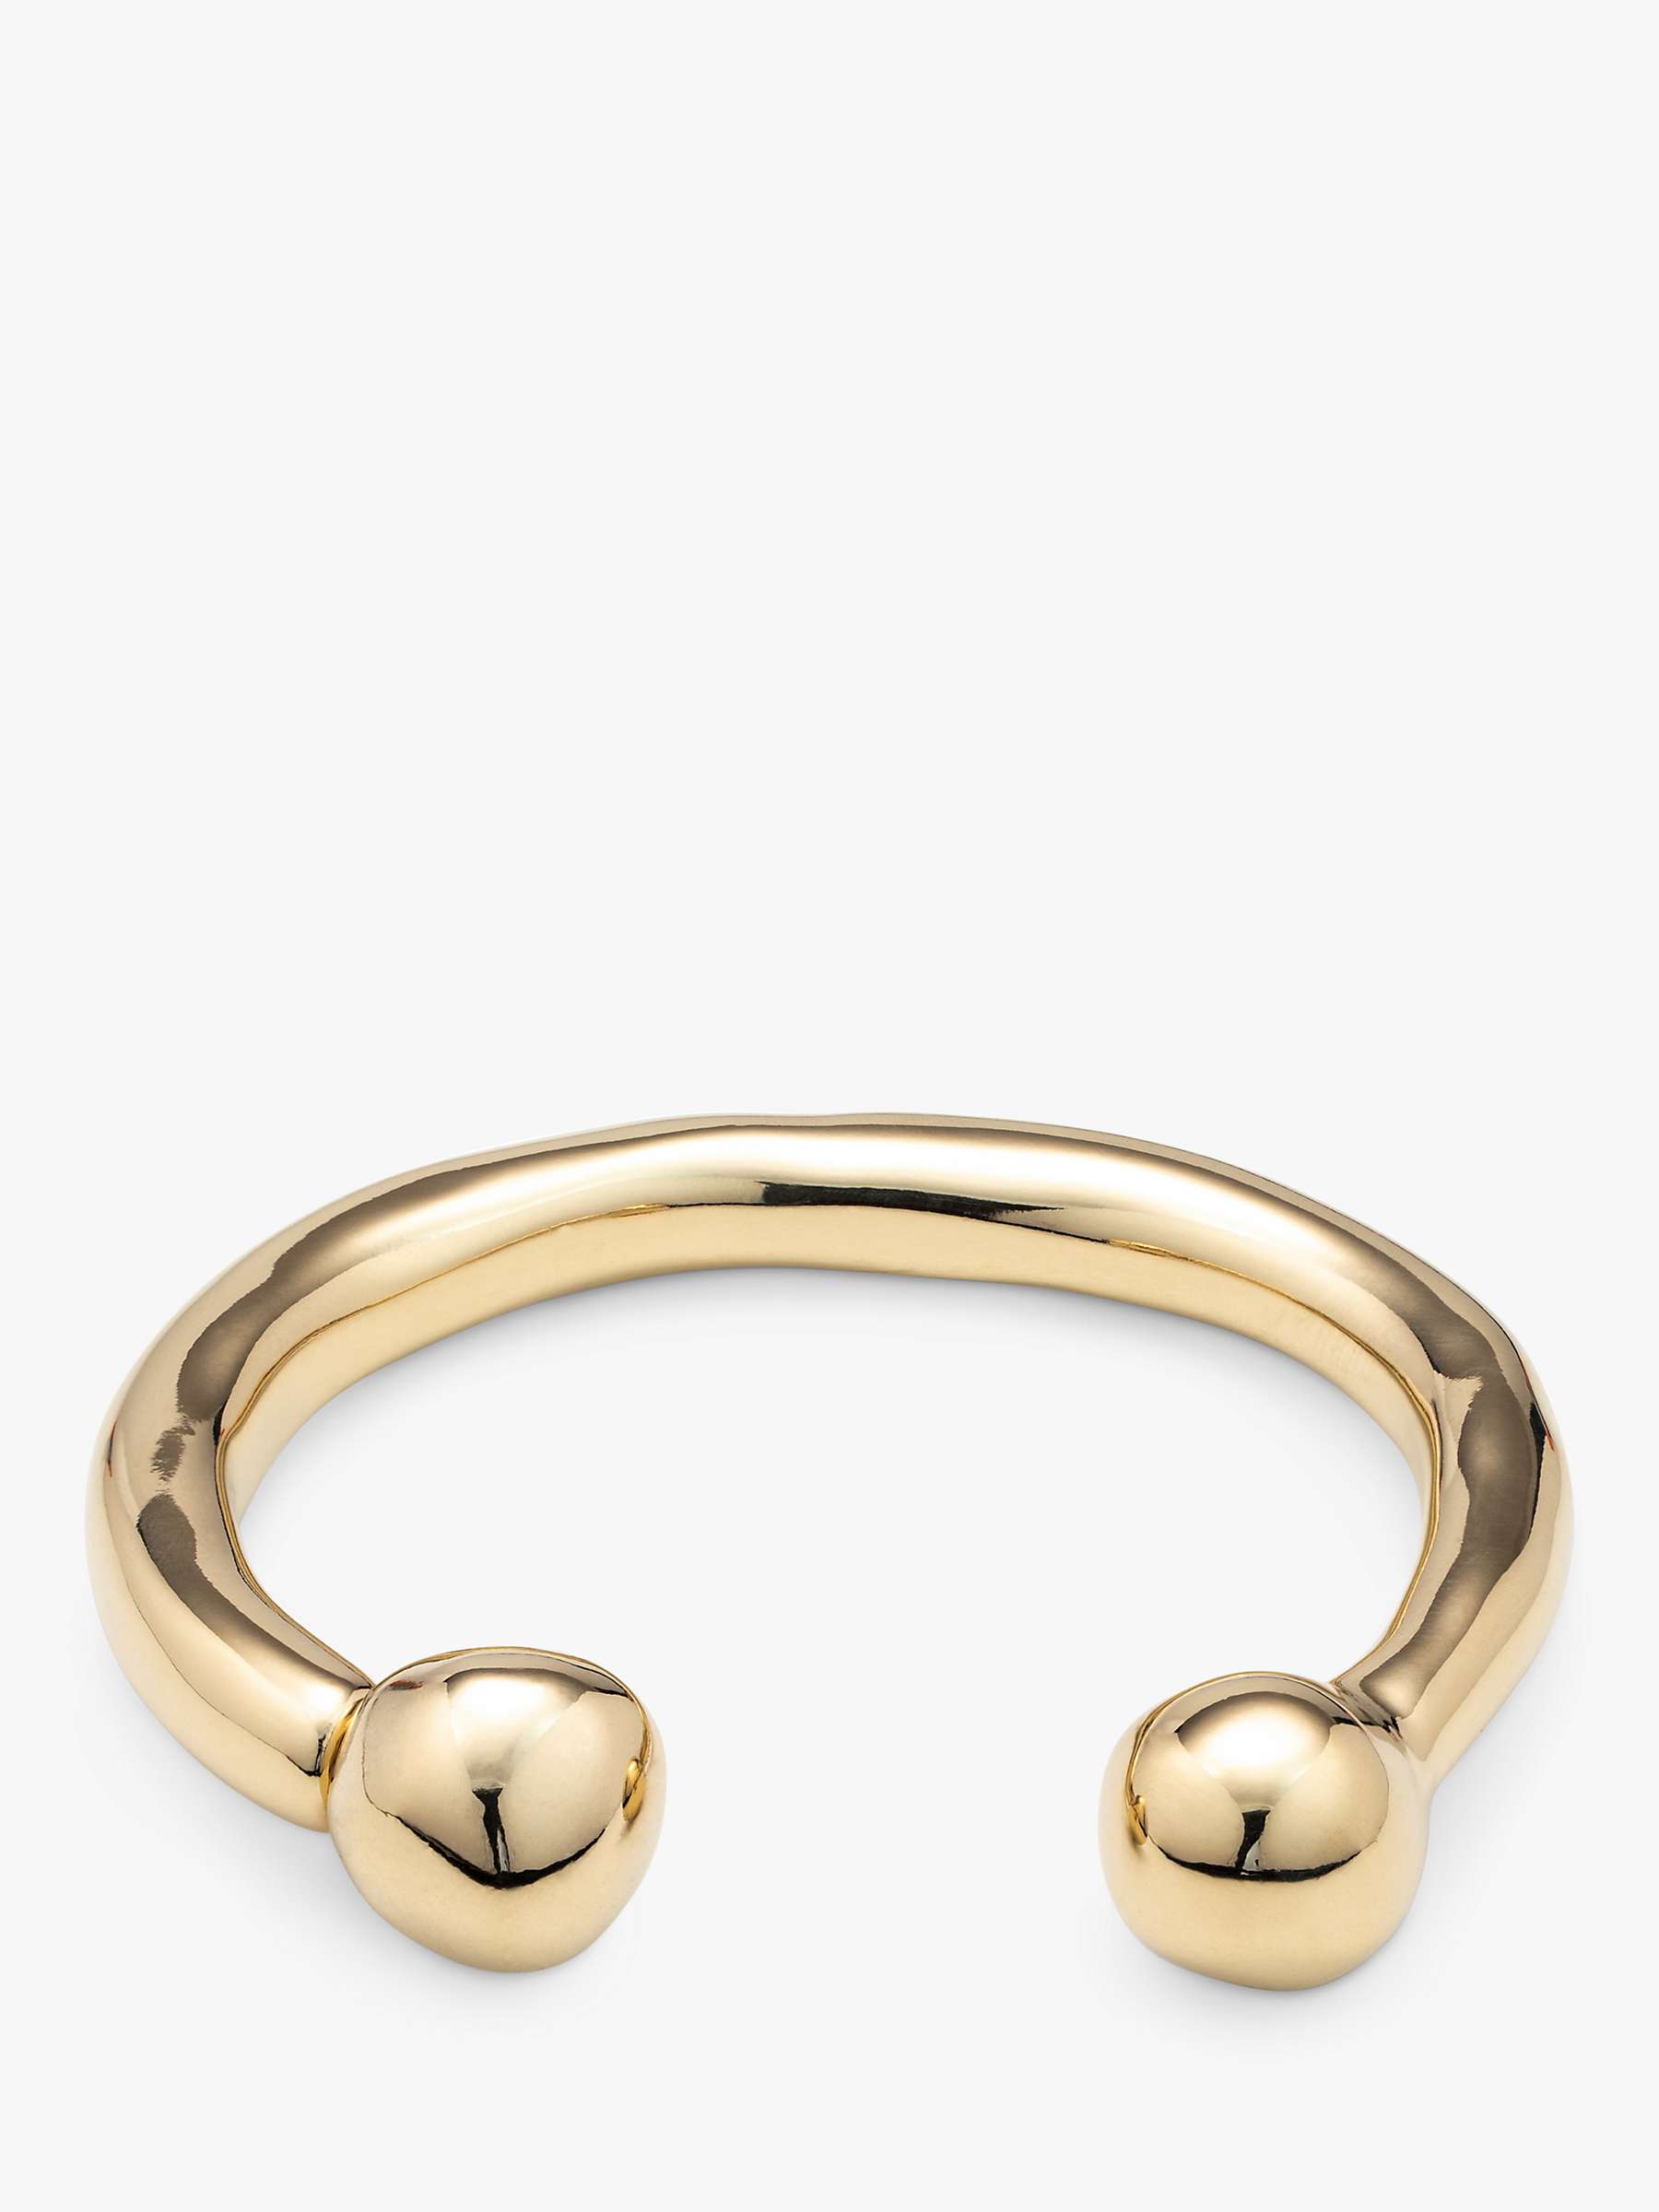 Buy UNOde50 Open End Ball Bead Bangle Online at johnlewis.com